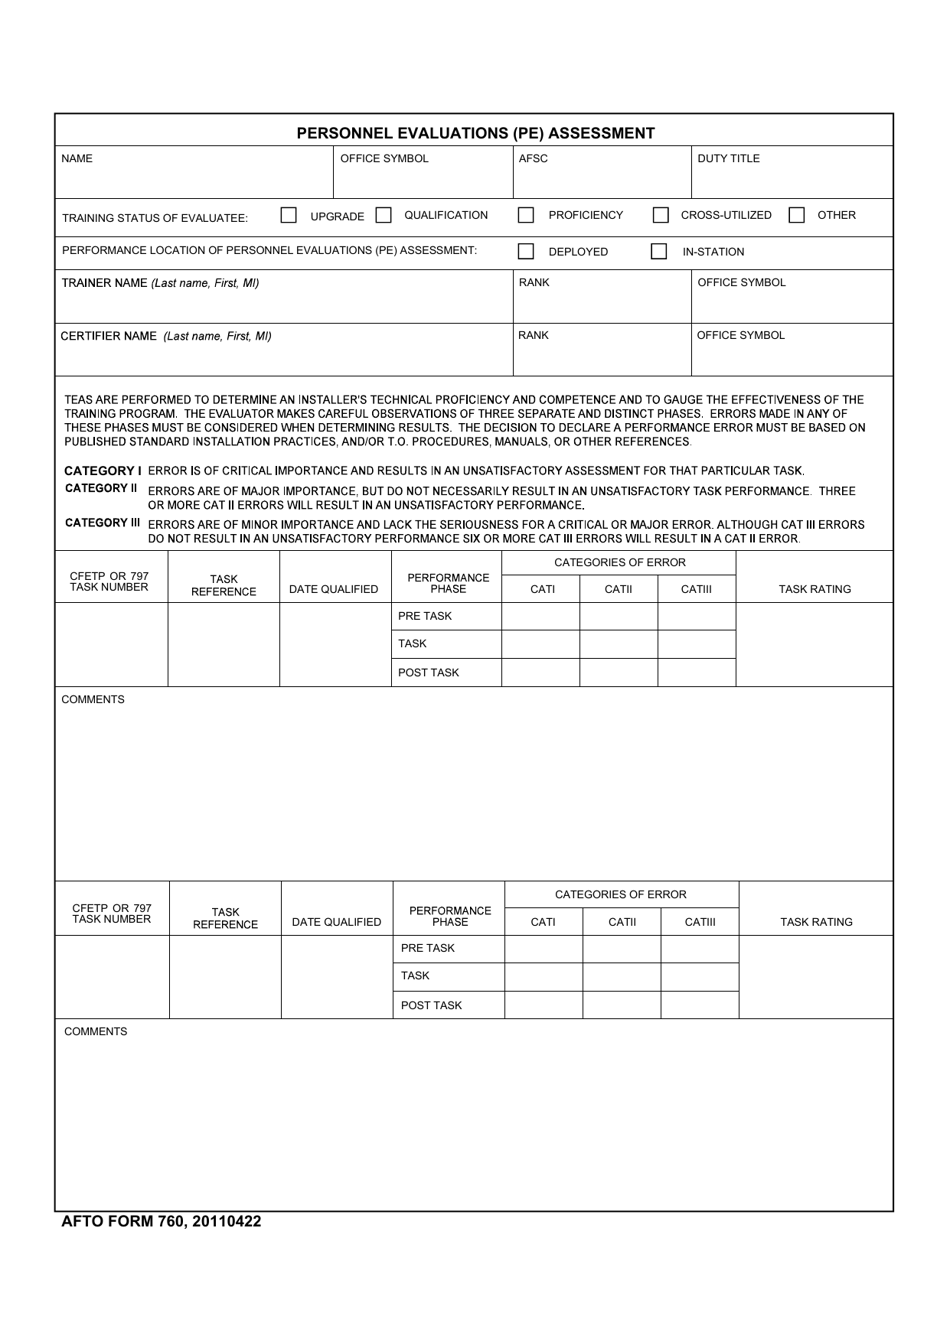 AFTO Form 760 Personnel Evaluations (Pe) Assessment, Page 1